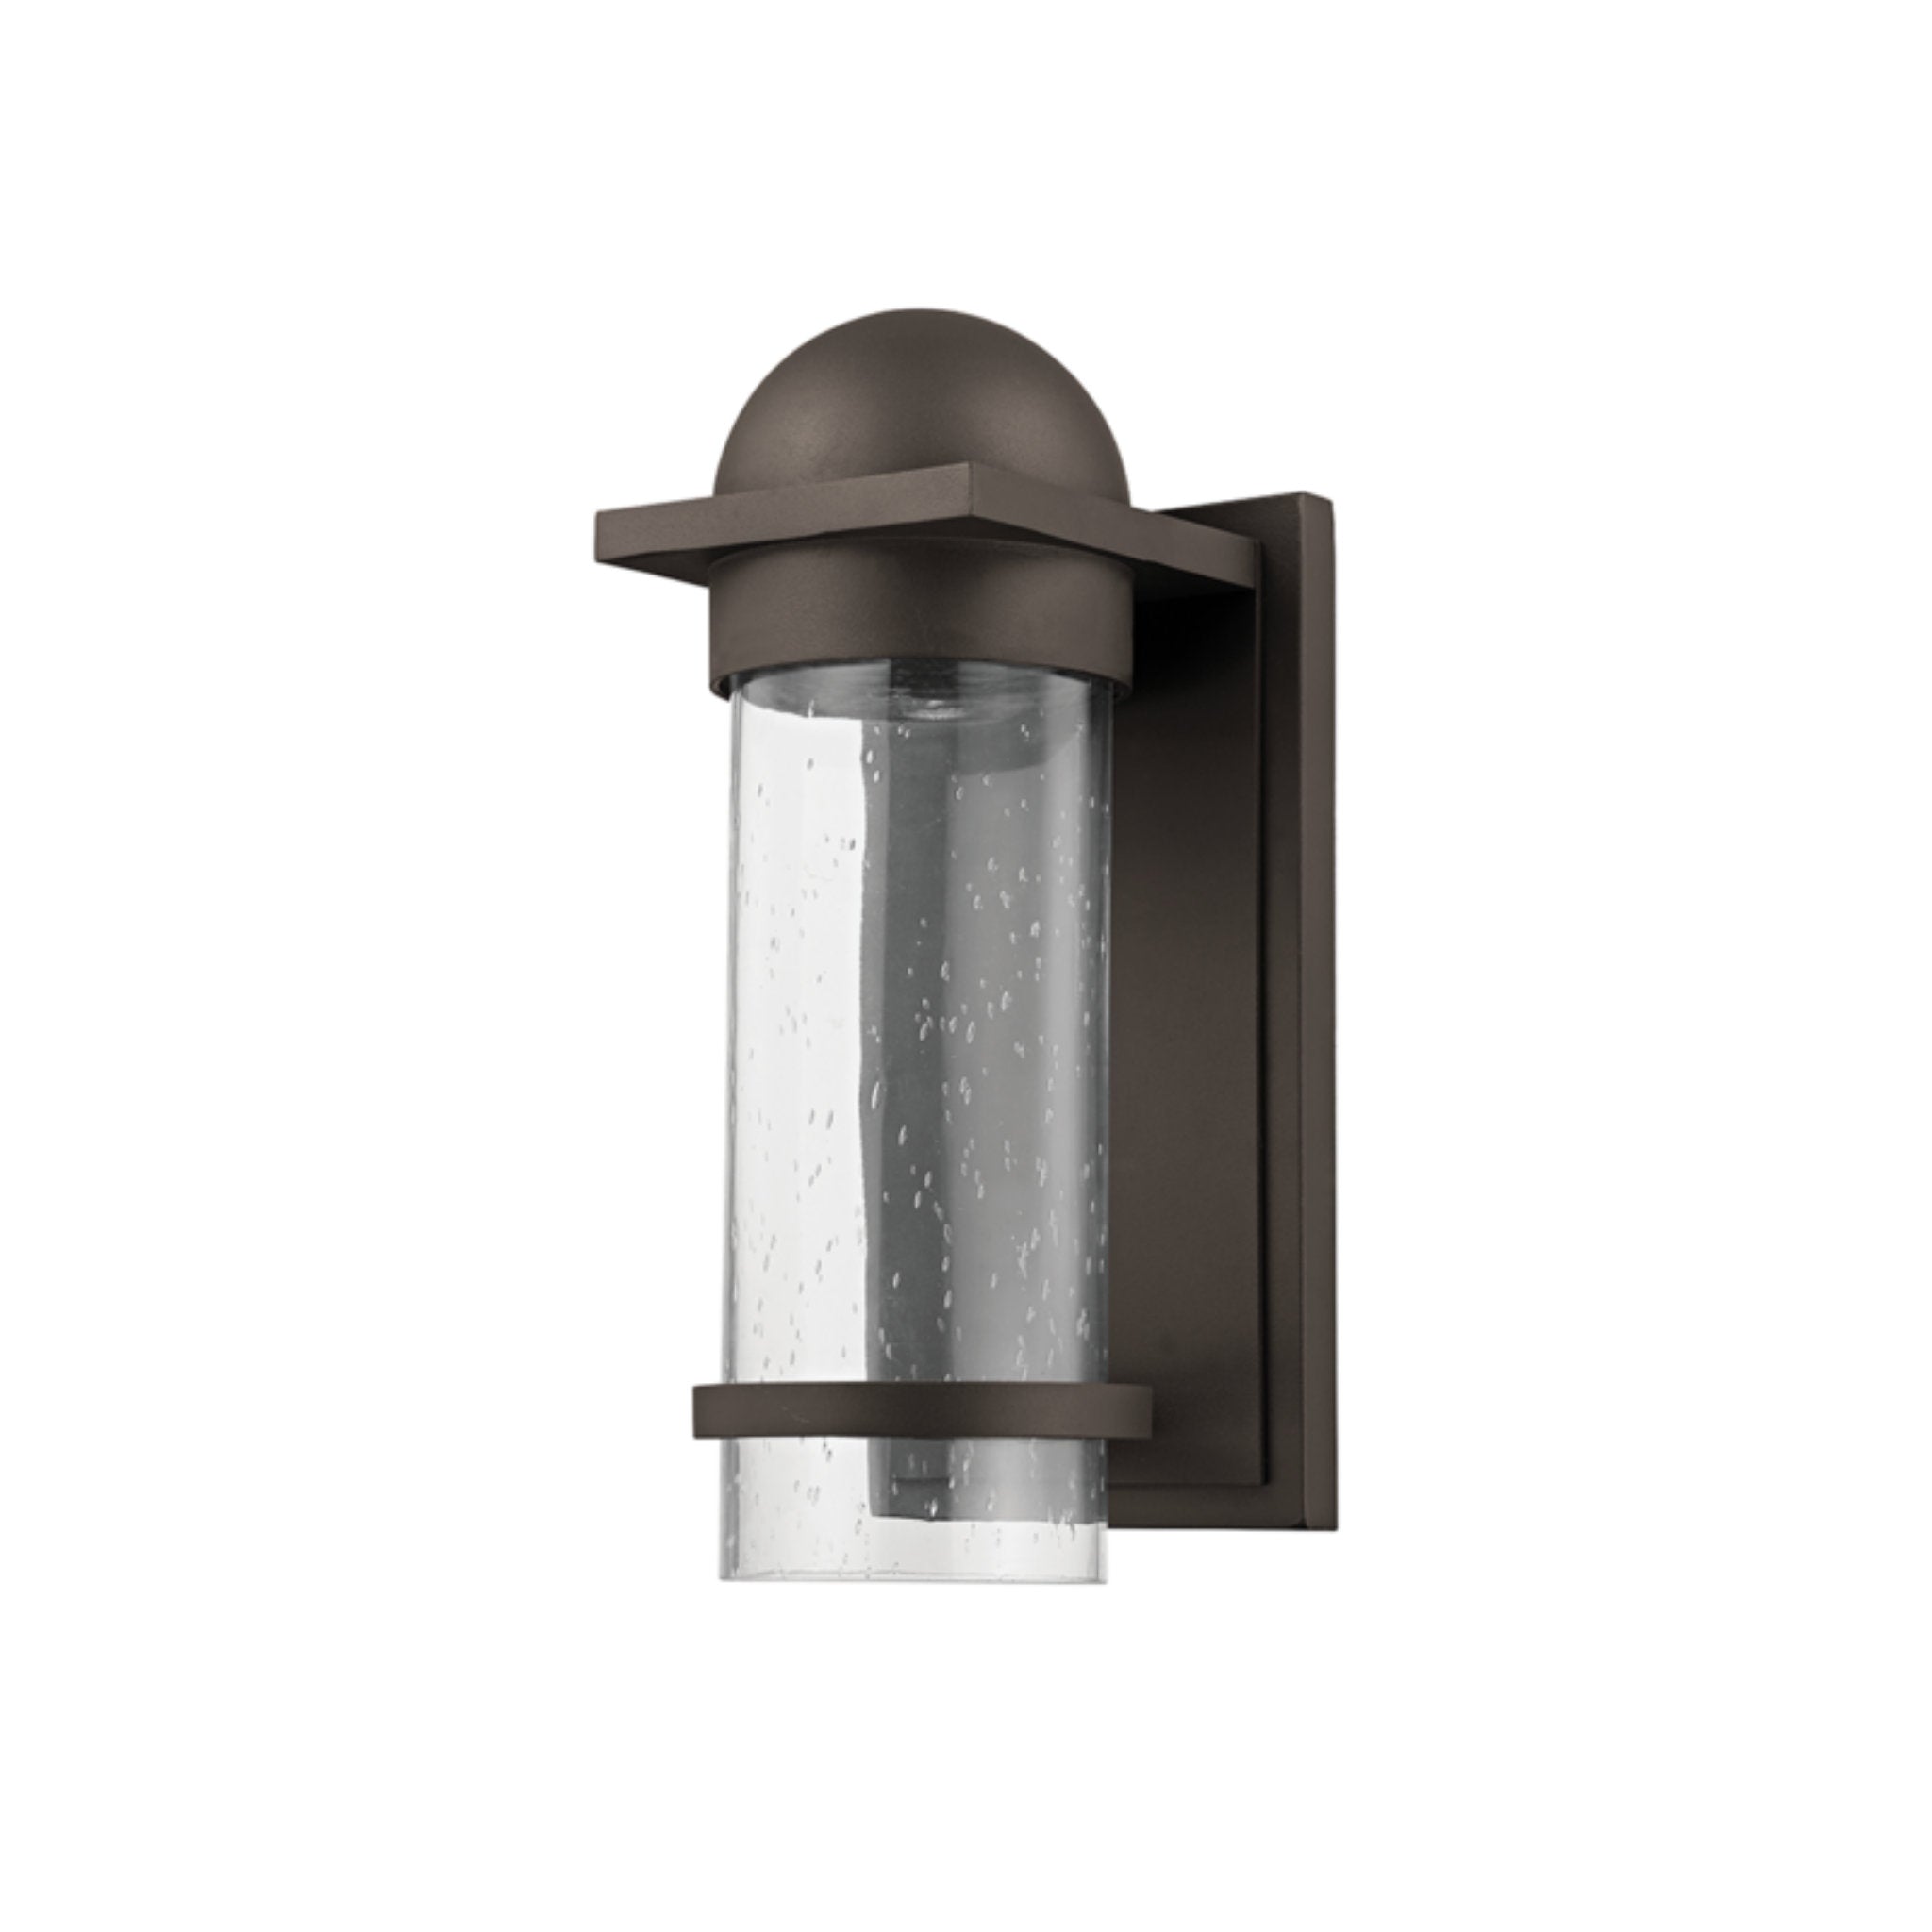 Nero 1 Light Wall Sconce in Textured Bronze